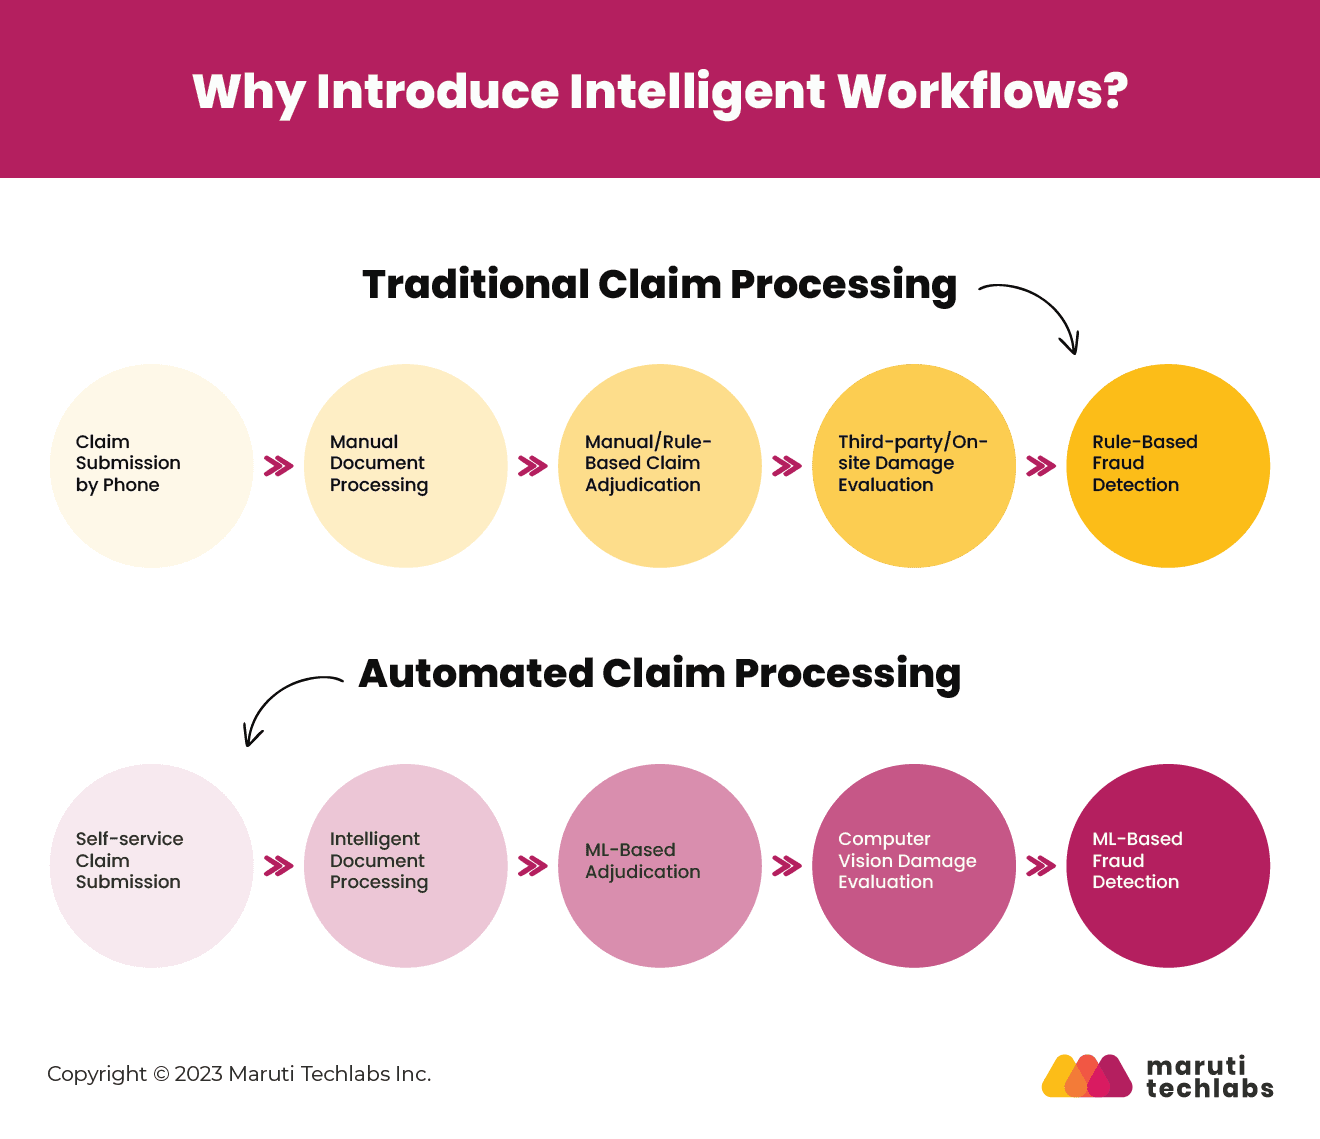 why introduce intelligent workflows?